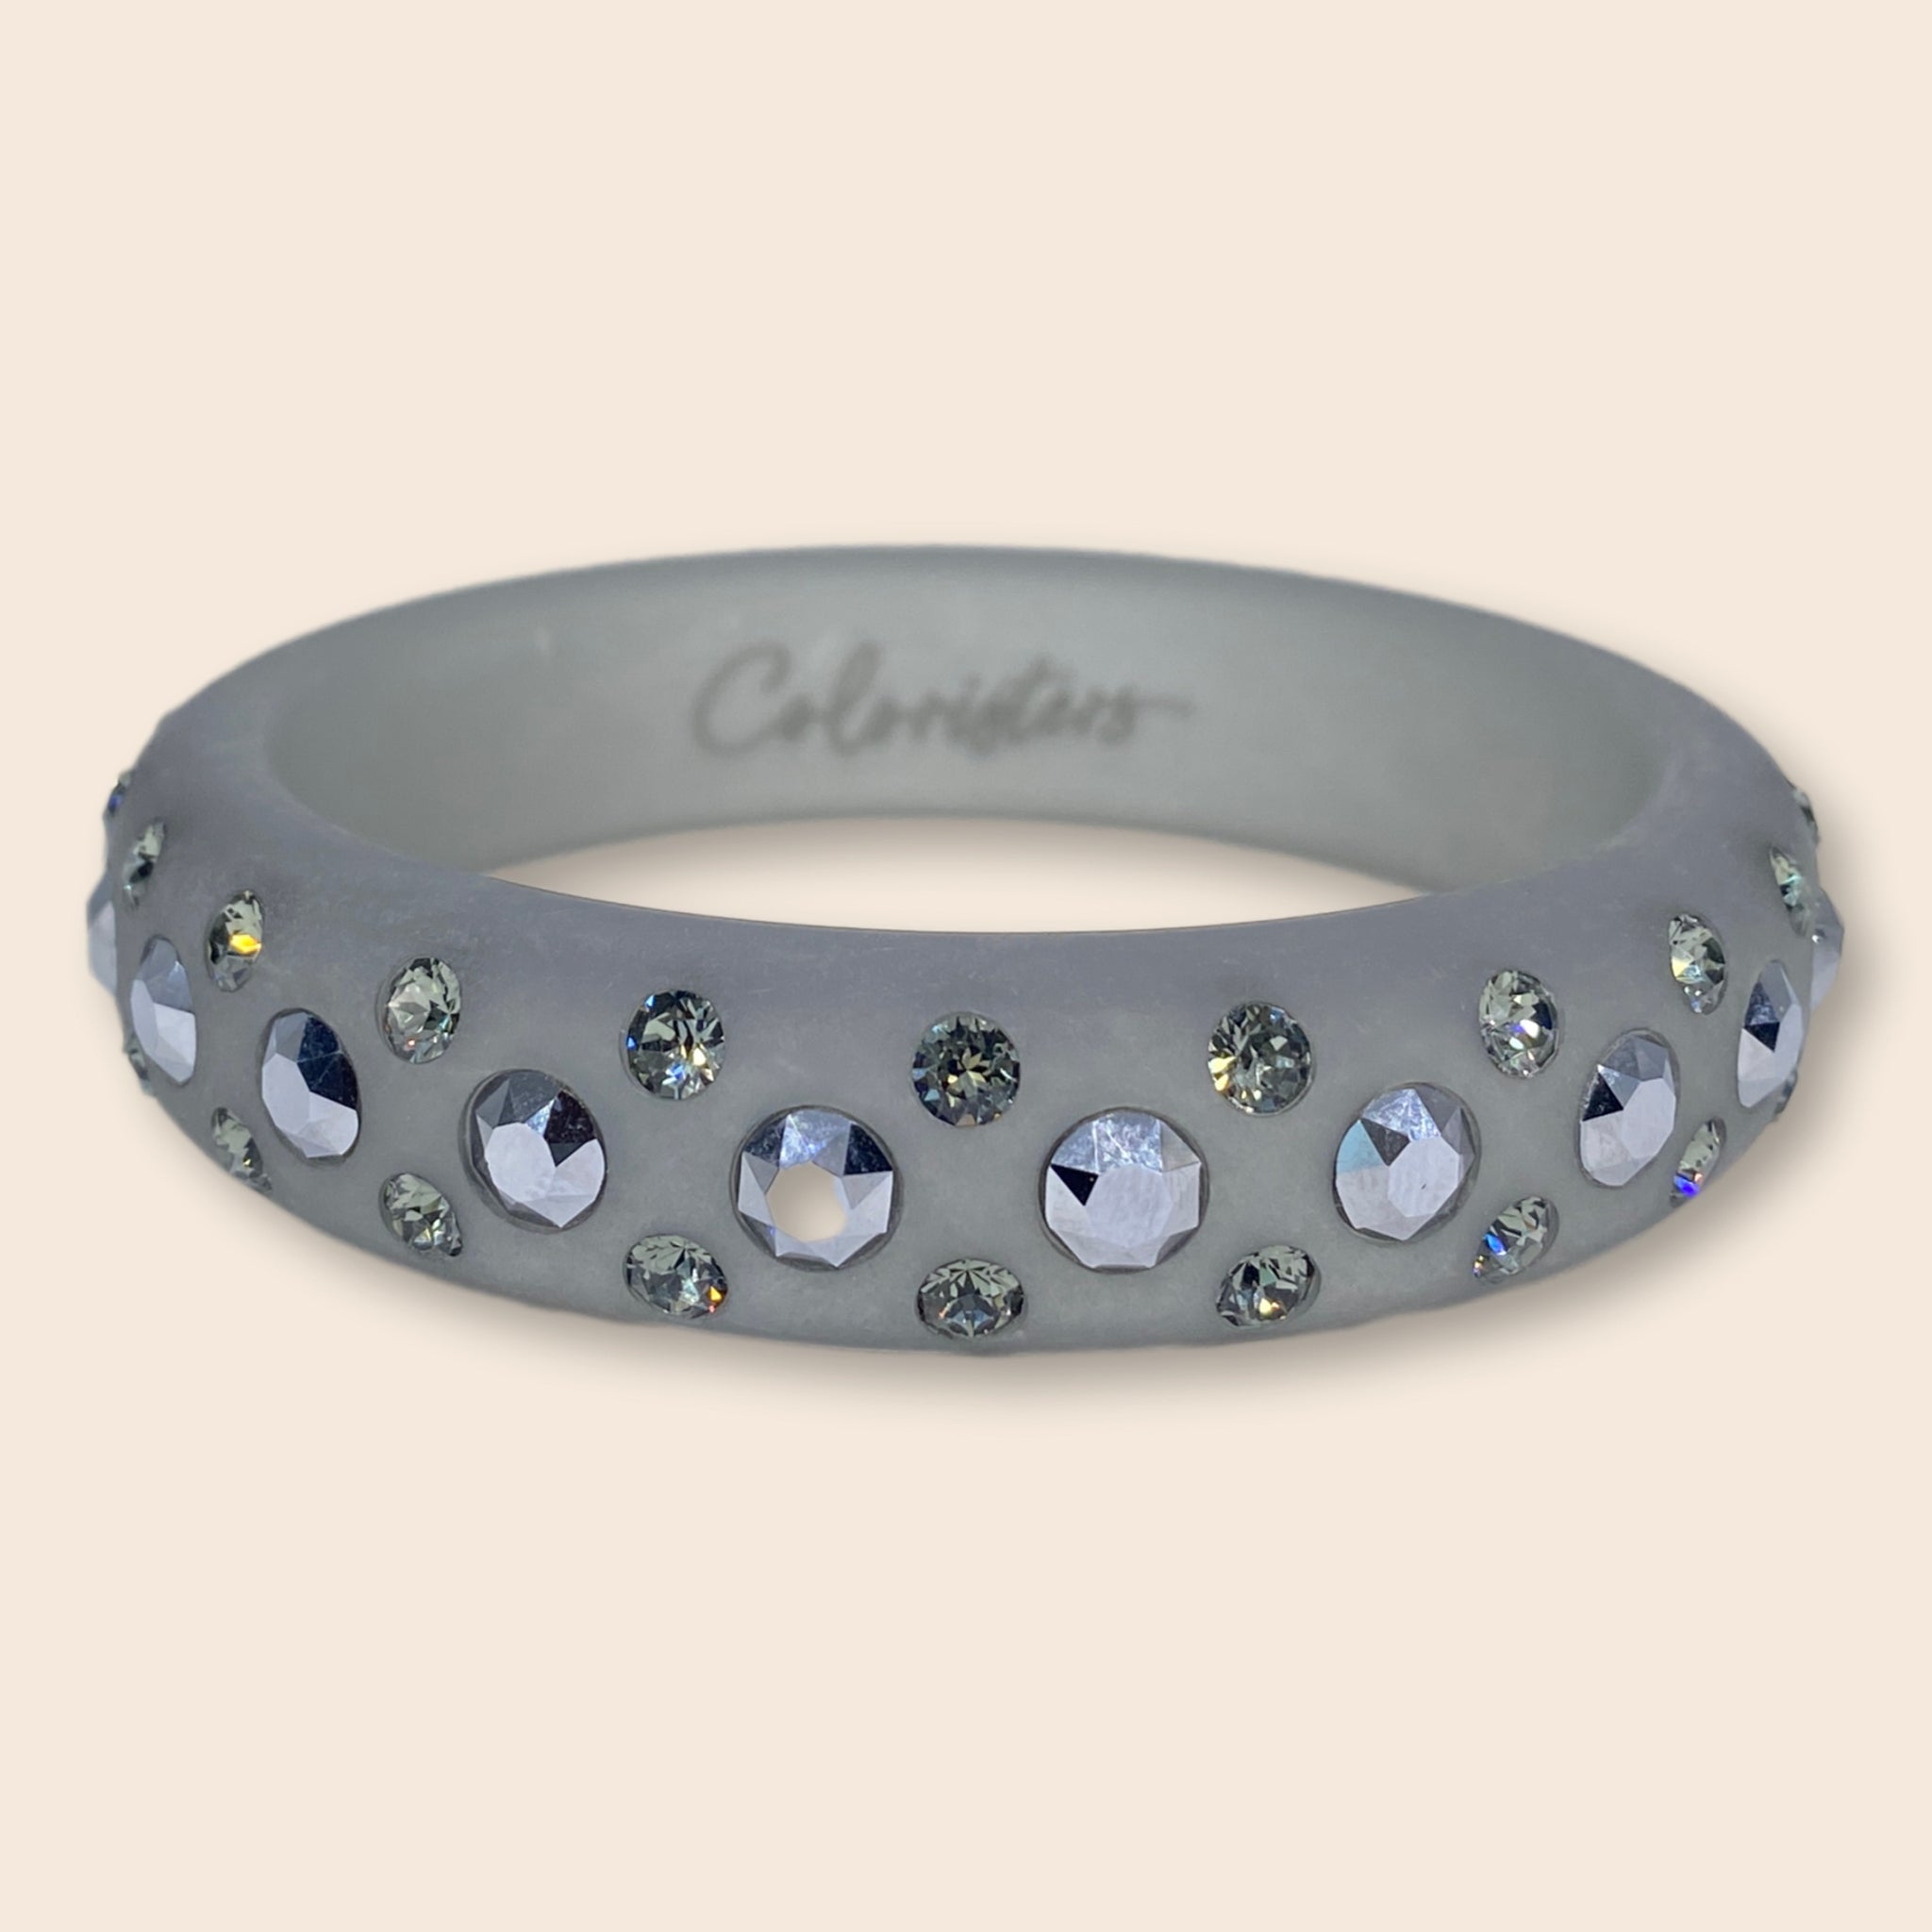 Grauer Coloristers Armreifen Catania mit Kristallen. Grey Coloristers Bangle Catania with crystals.